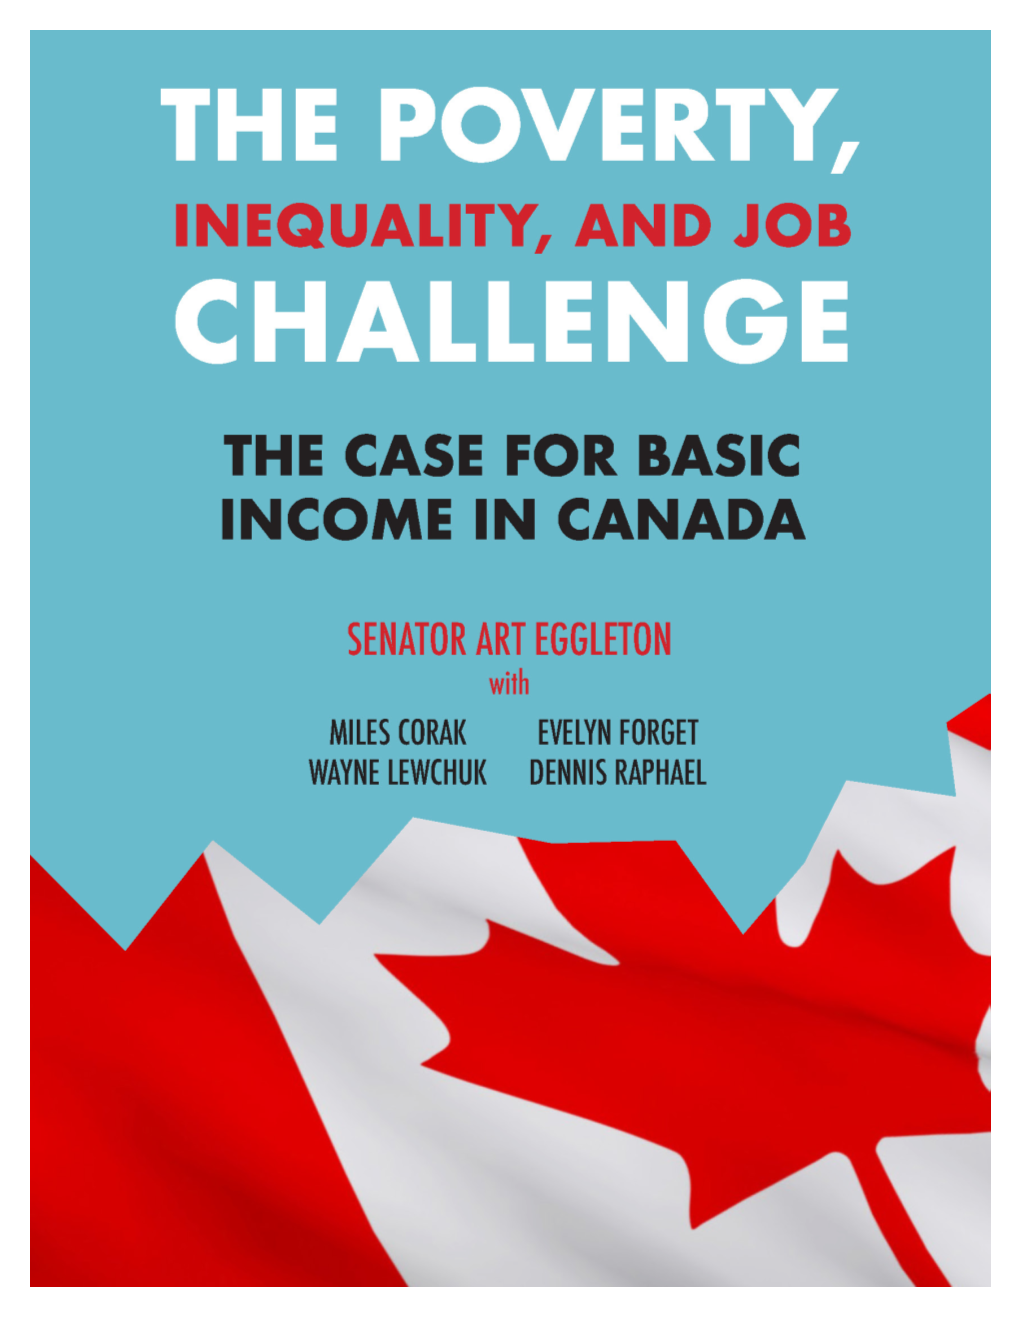 The Poverty, Inequality, and Job Challenge the Case for Basic Income in Canada